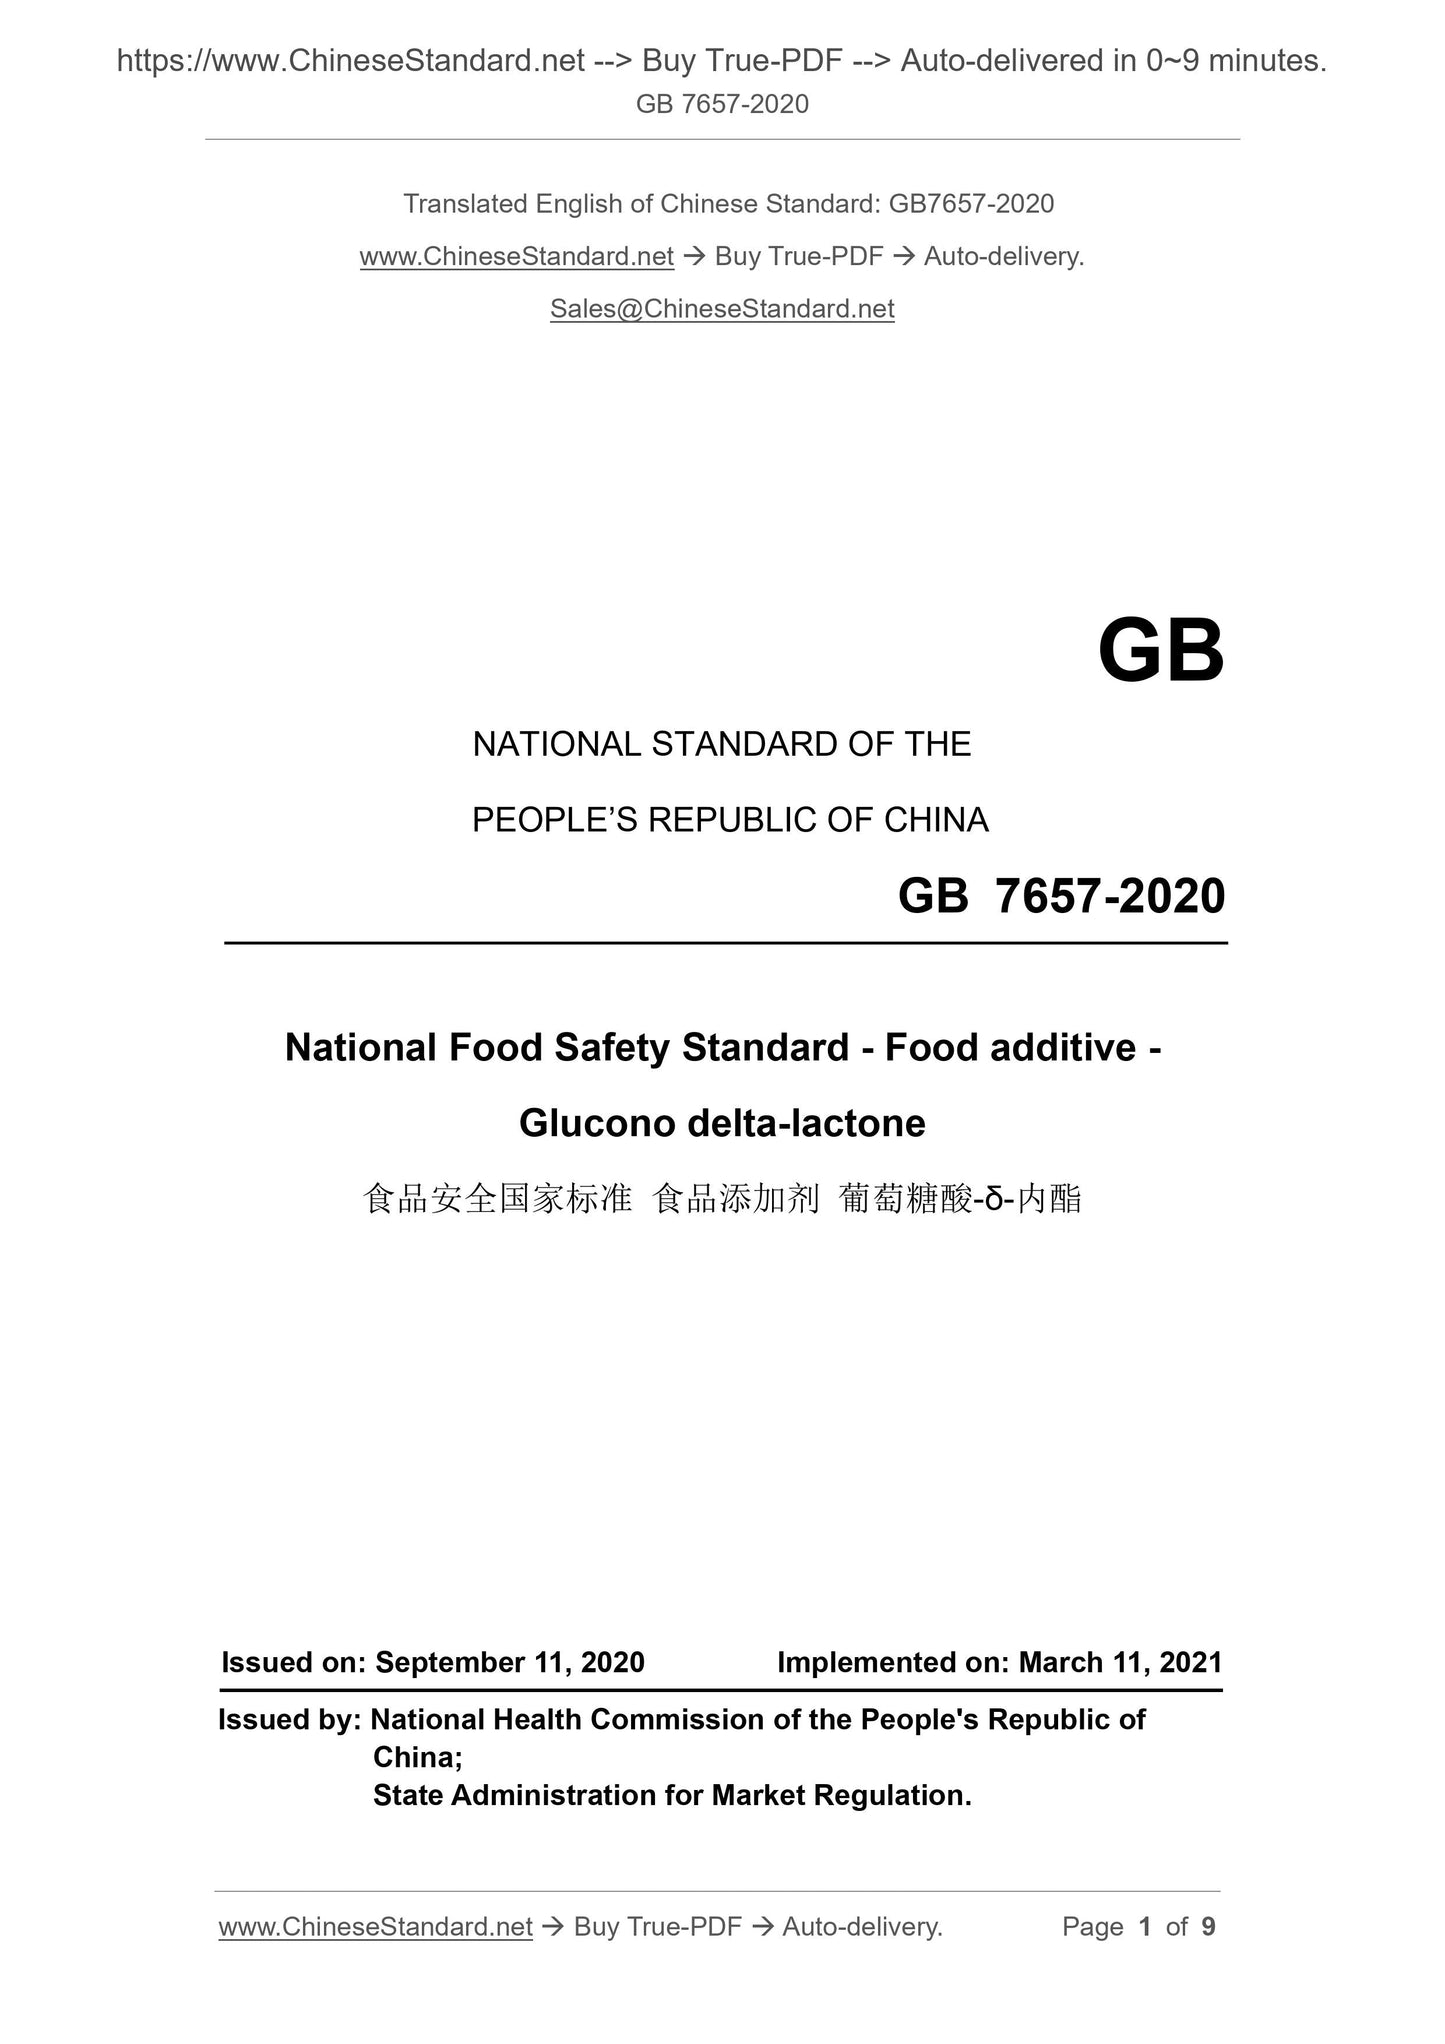 GB 7657-2020 Page 1